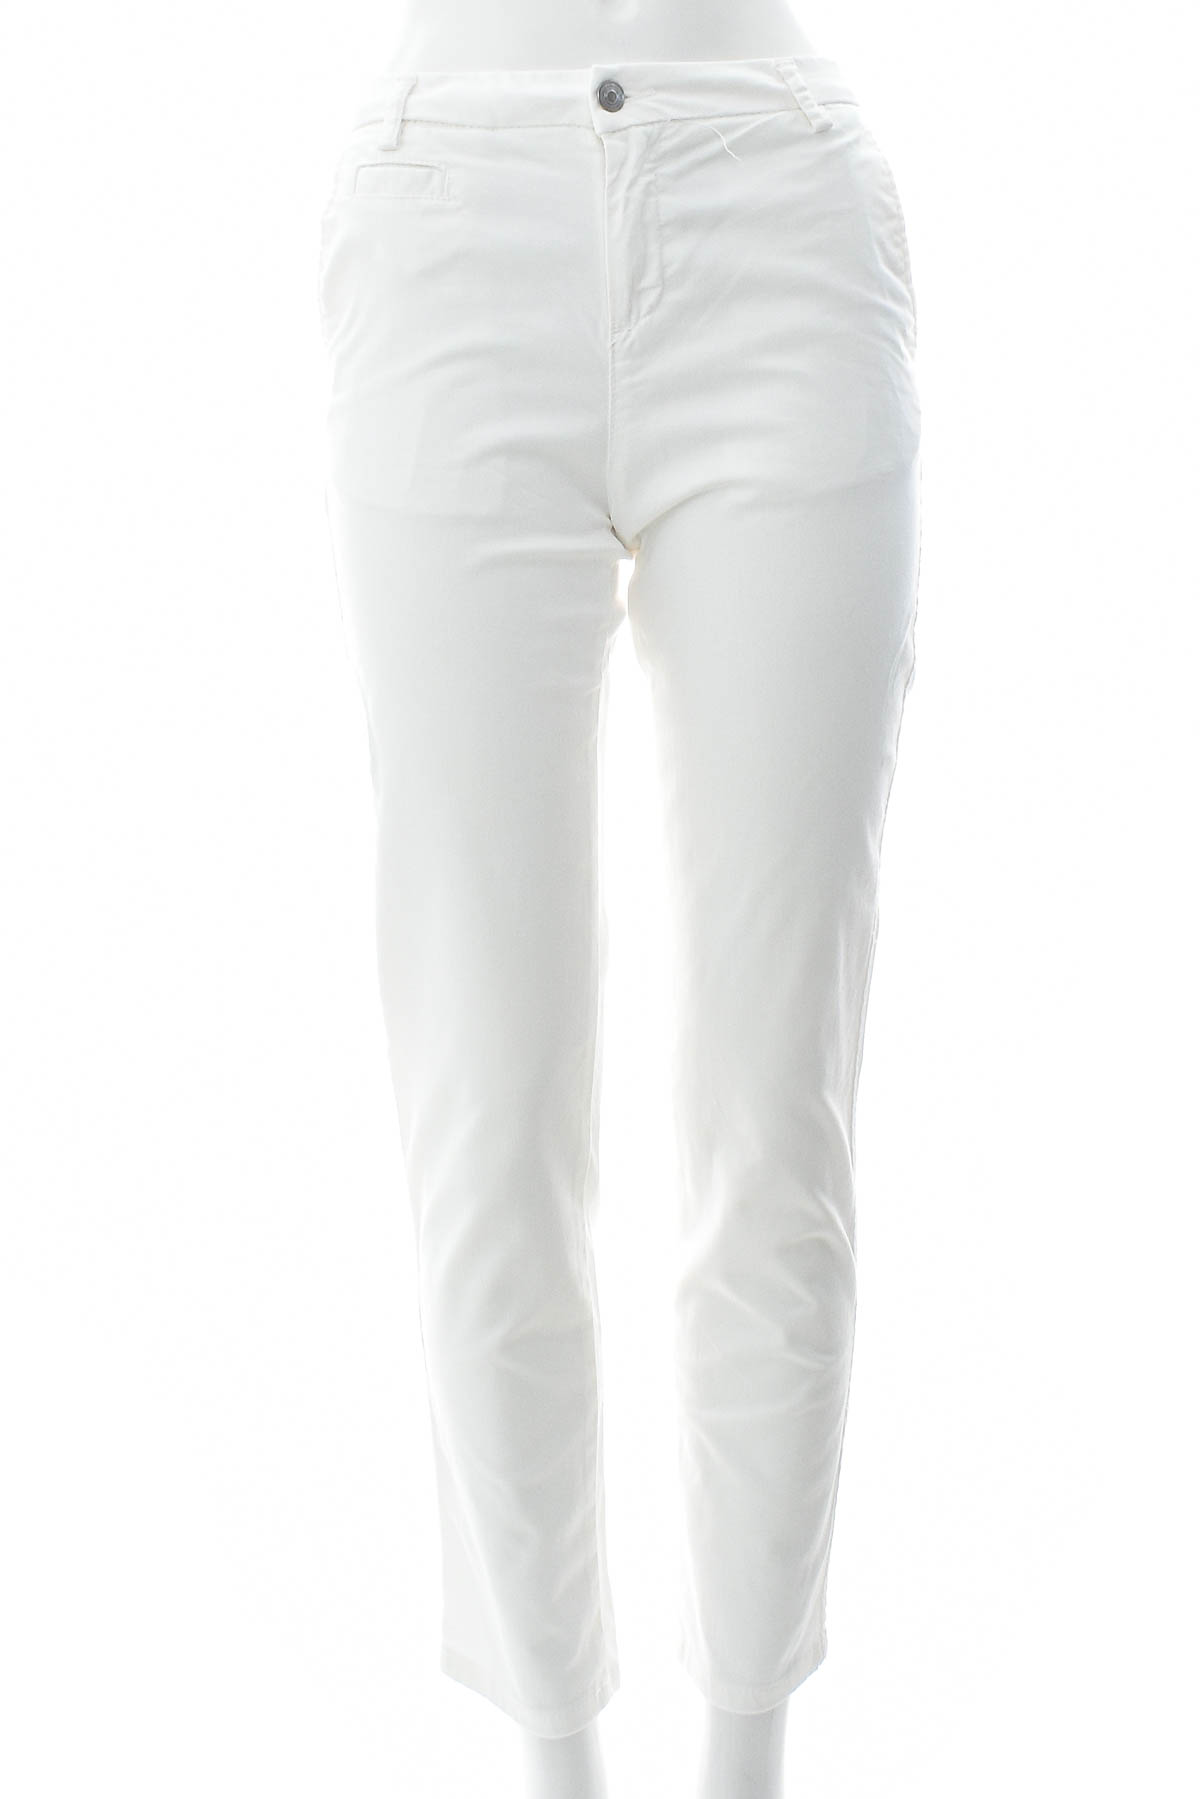 Women's trousers - United Colors of Benetton - 0